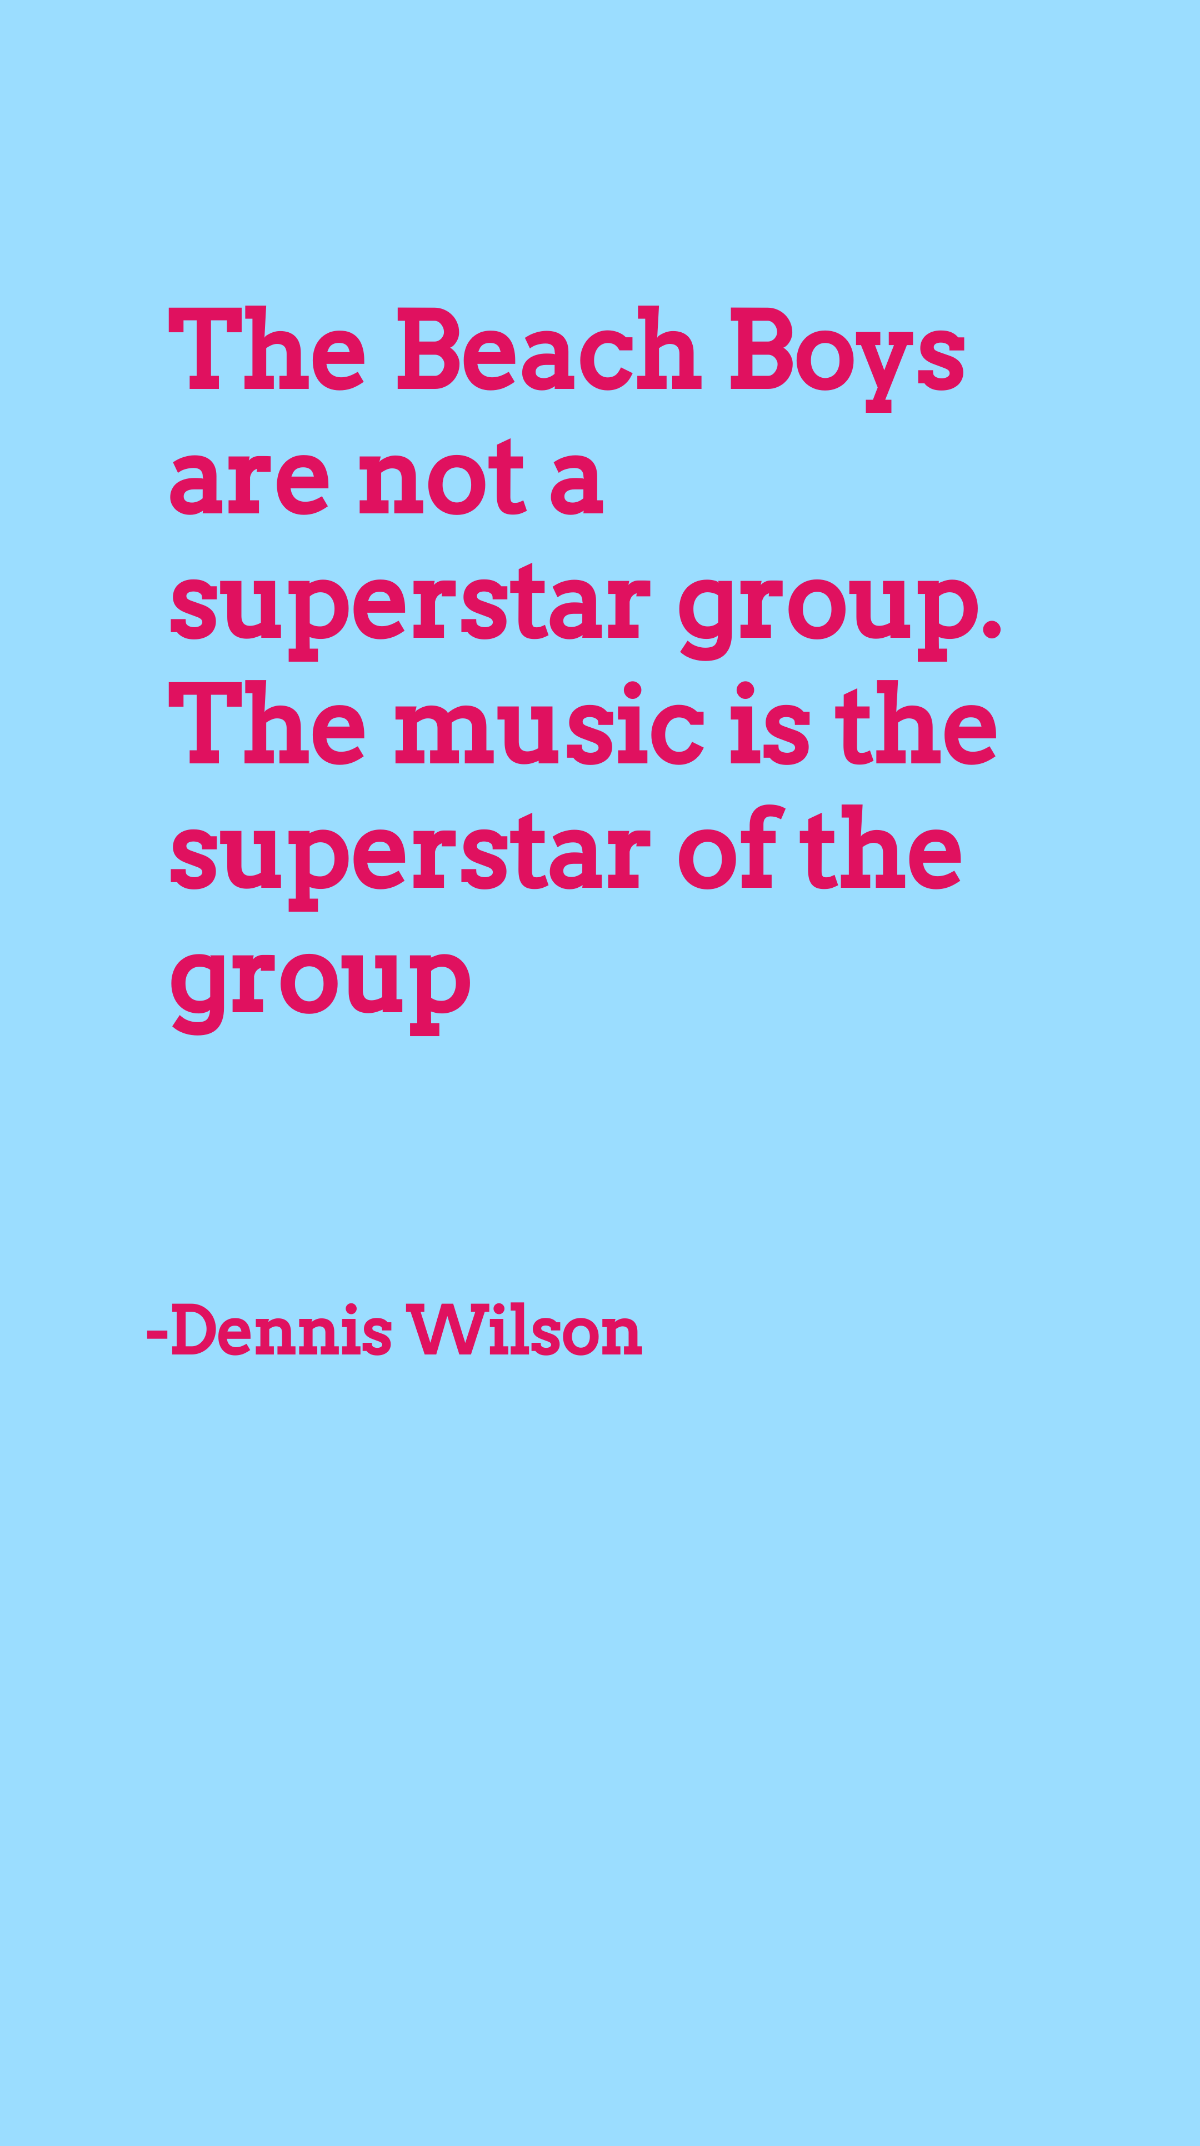 Dennis Wilson - The Beach Boys are not a superstar group. The music is the superstar of the group